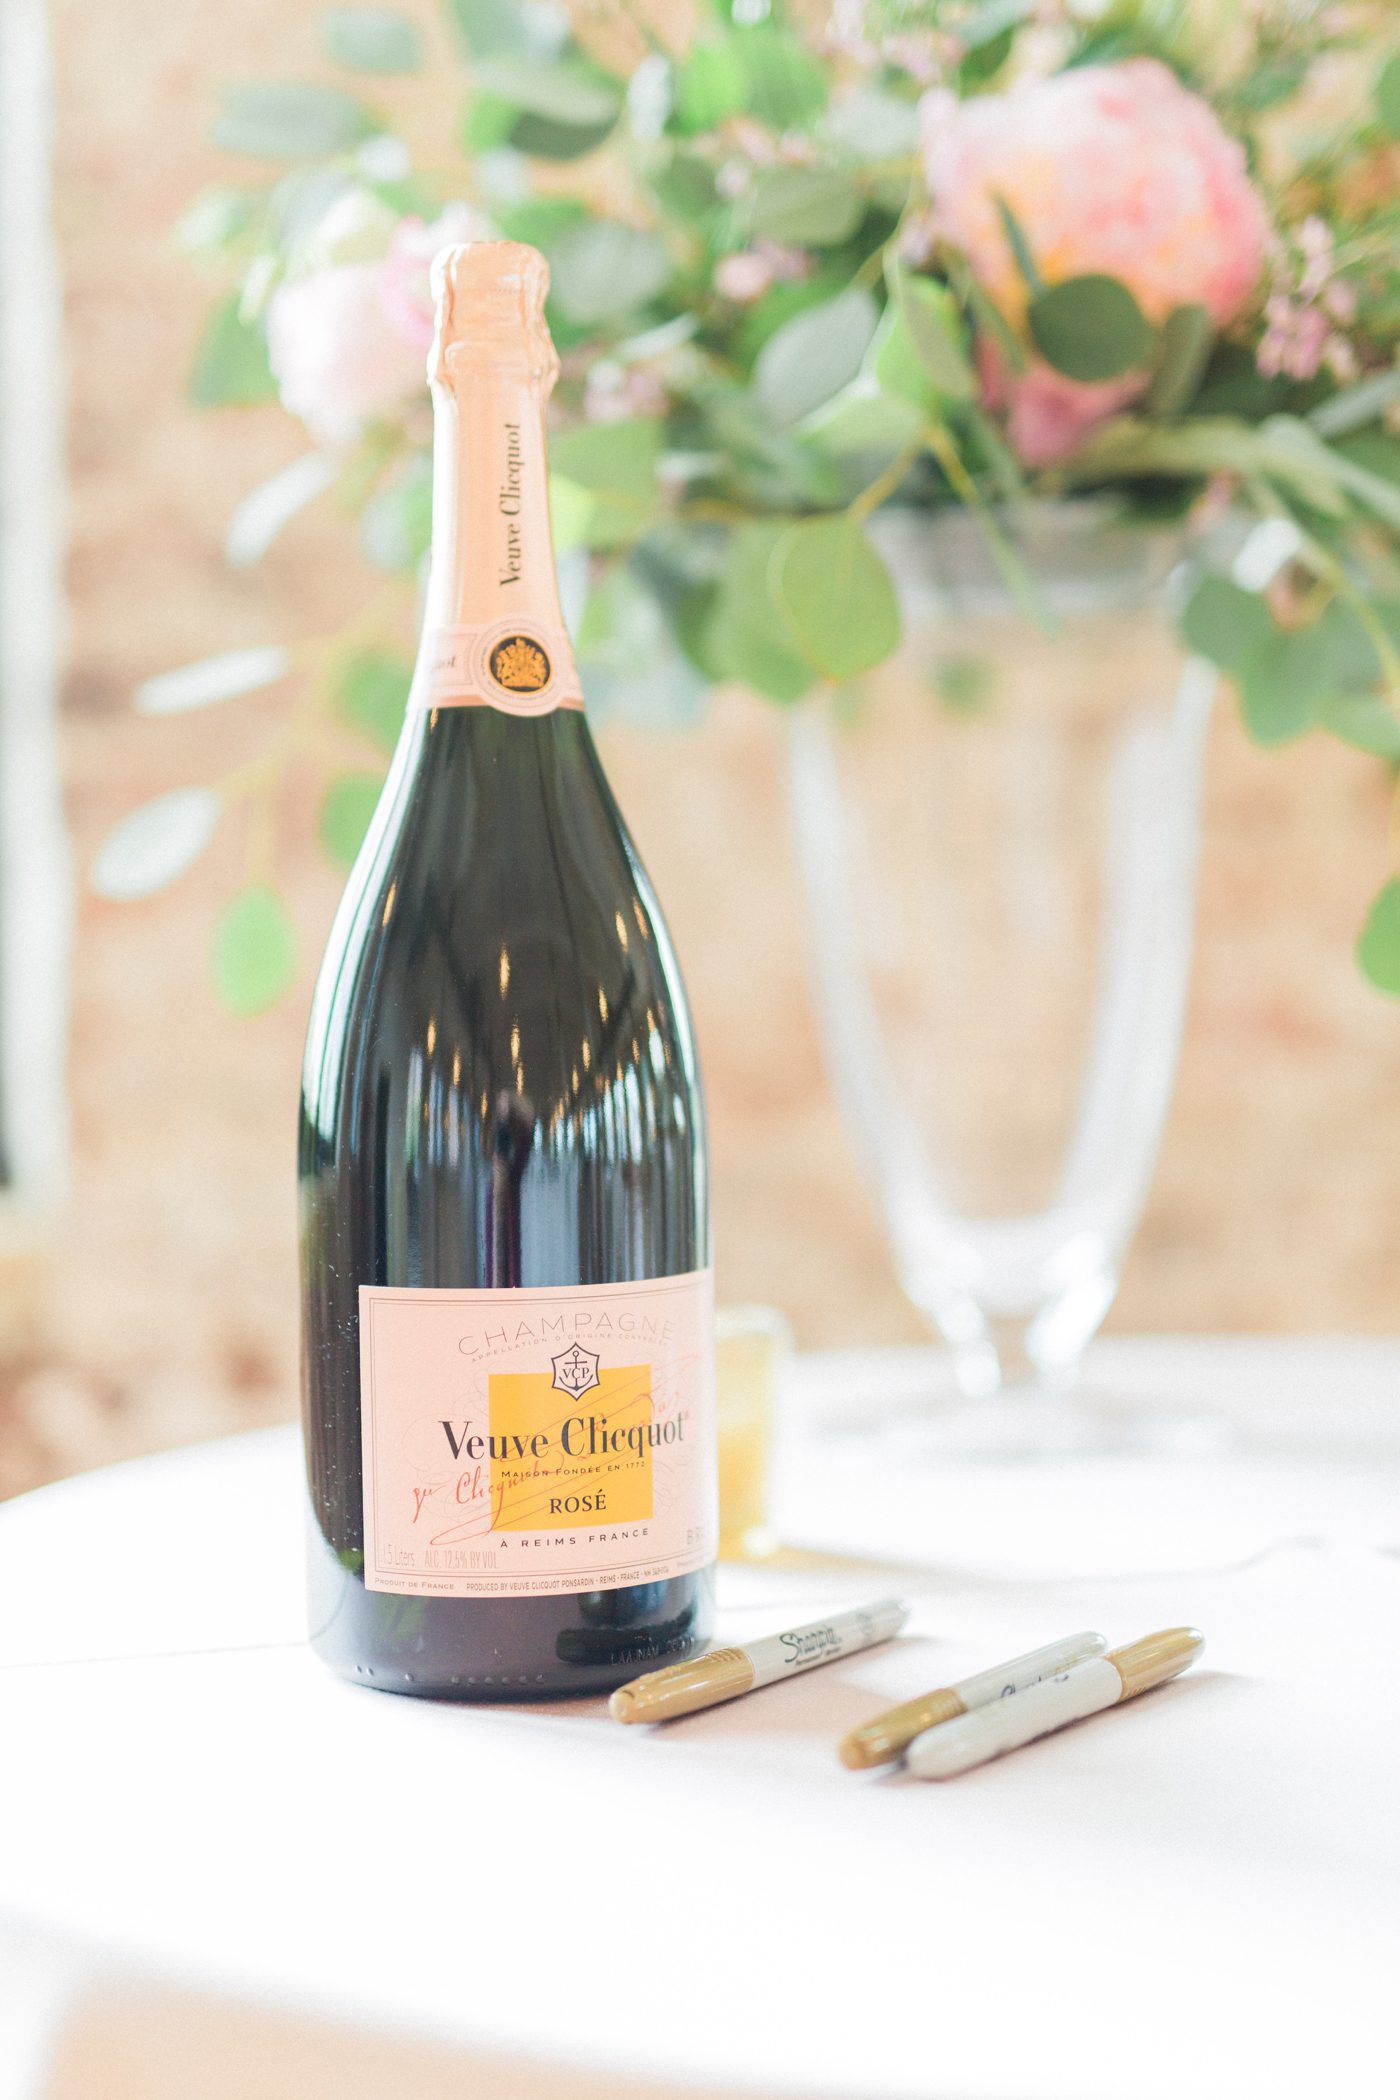 Veuve Clicquot champagne bottle for guests to sign for wedding couple